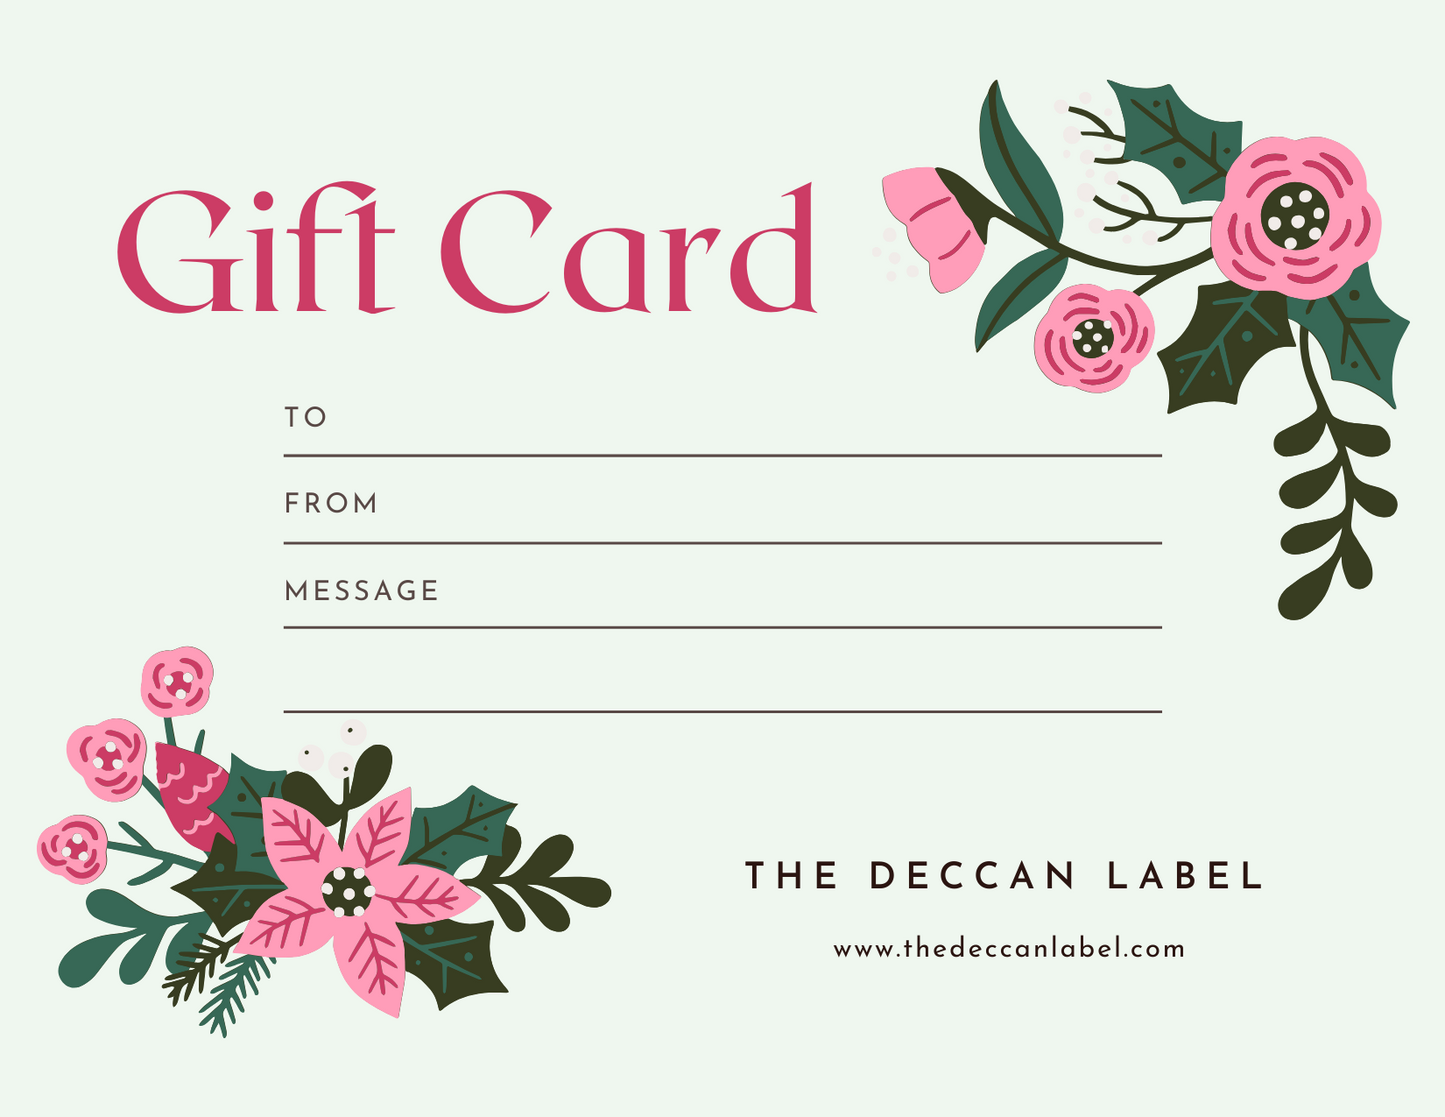 The Deccan Label Gift Card